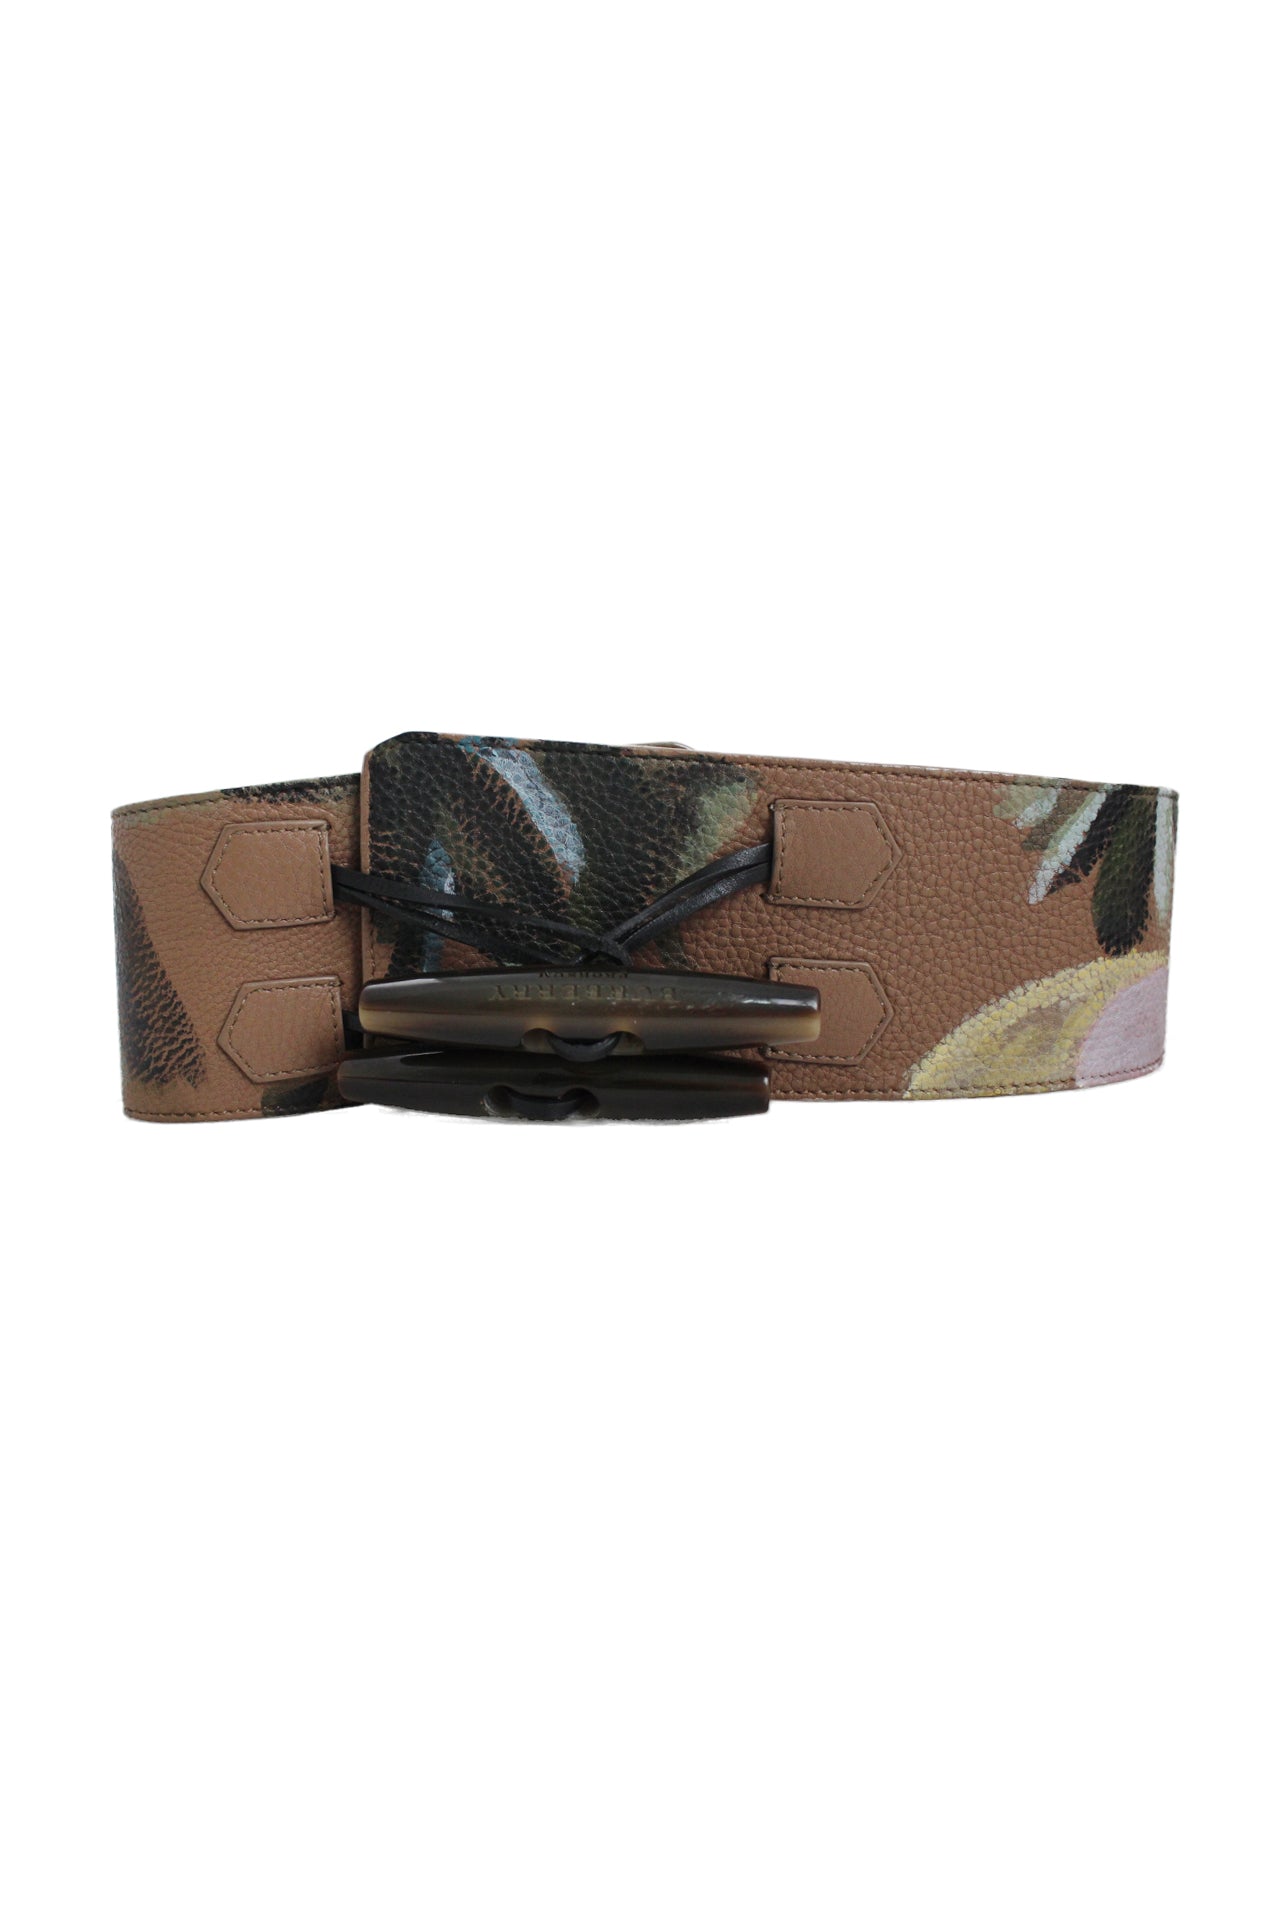 front of burberry brown wide toggle belt. features floral painted design throughout, and embossed logo brand at toggle closure. 